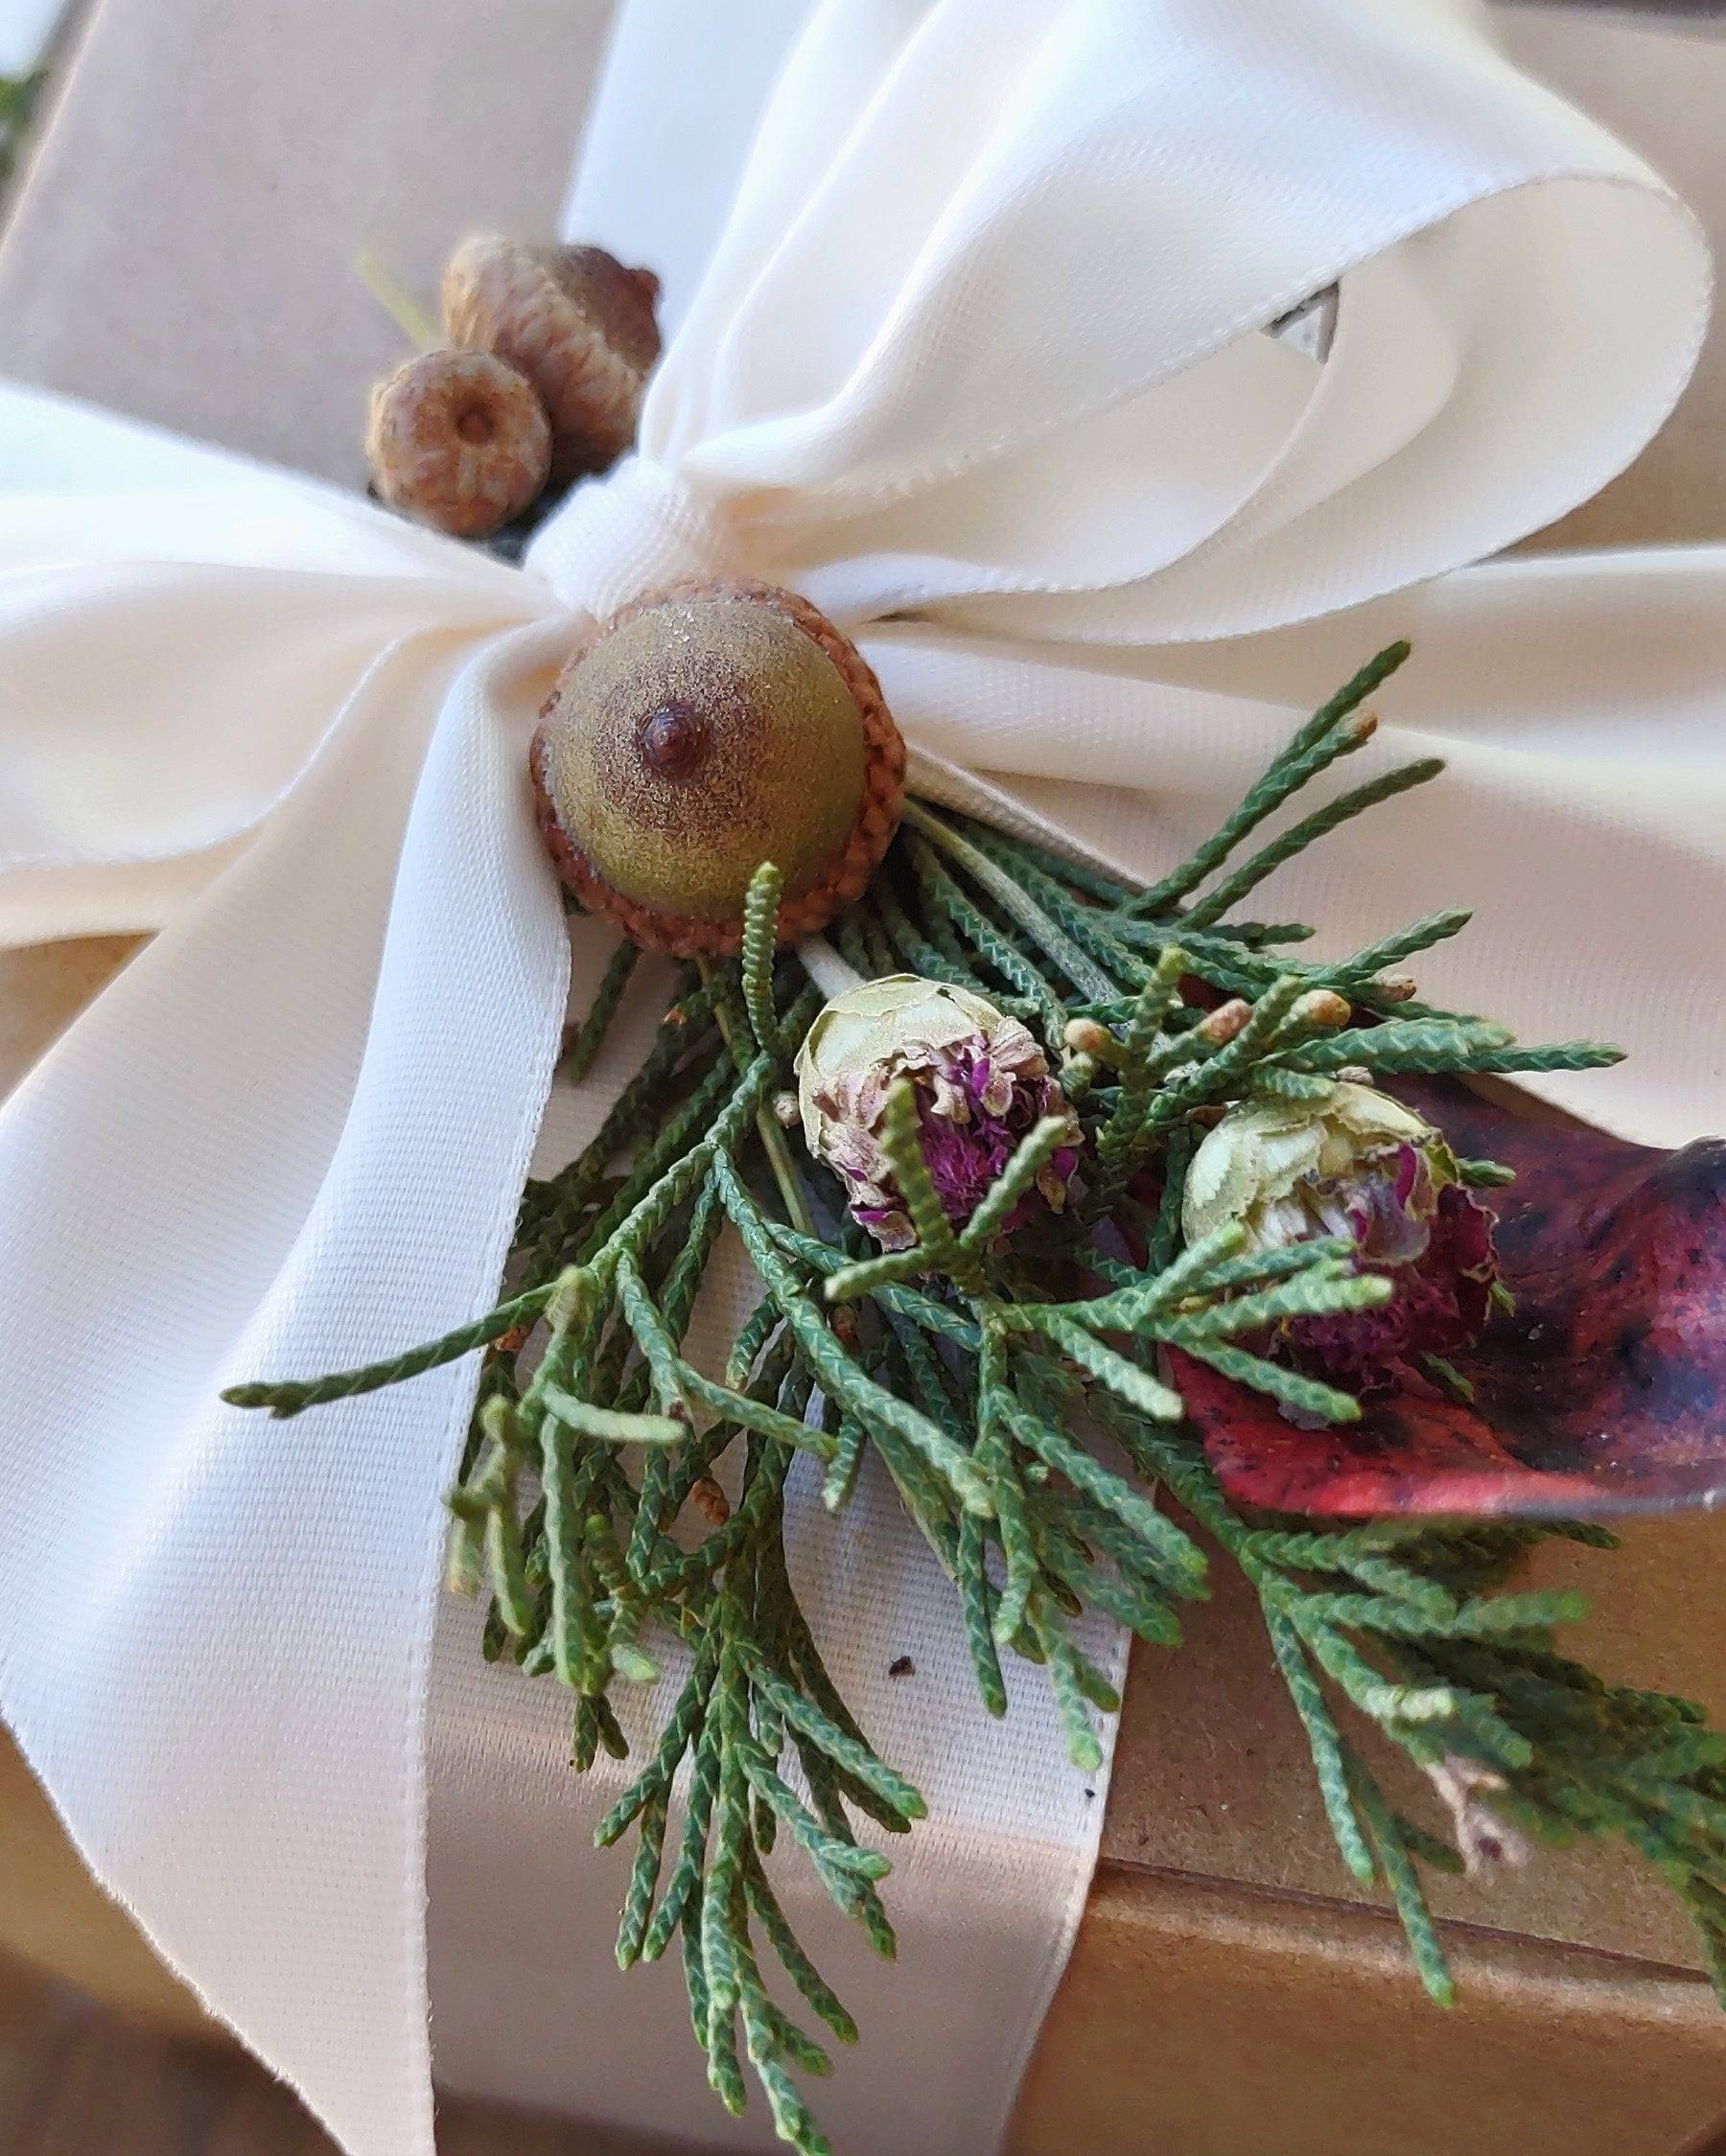 🎁 GIFT WRAPPING OPTIONS + DROP SHIPPING - Cold Creek Natural Farm